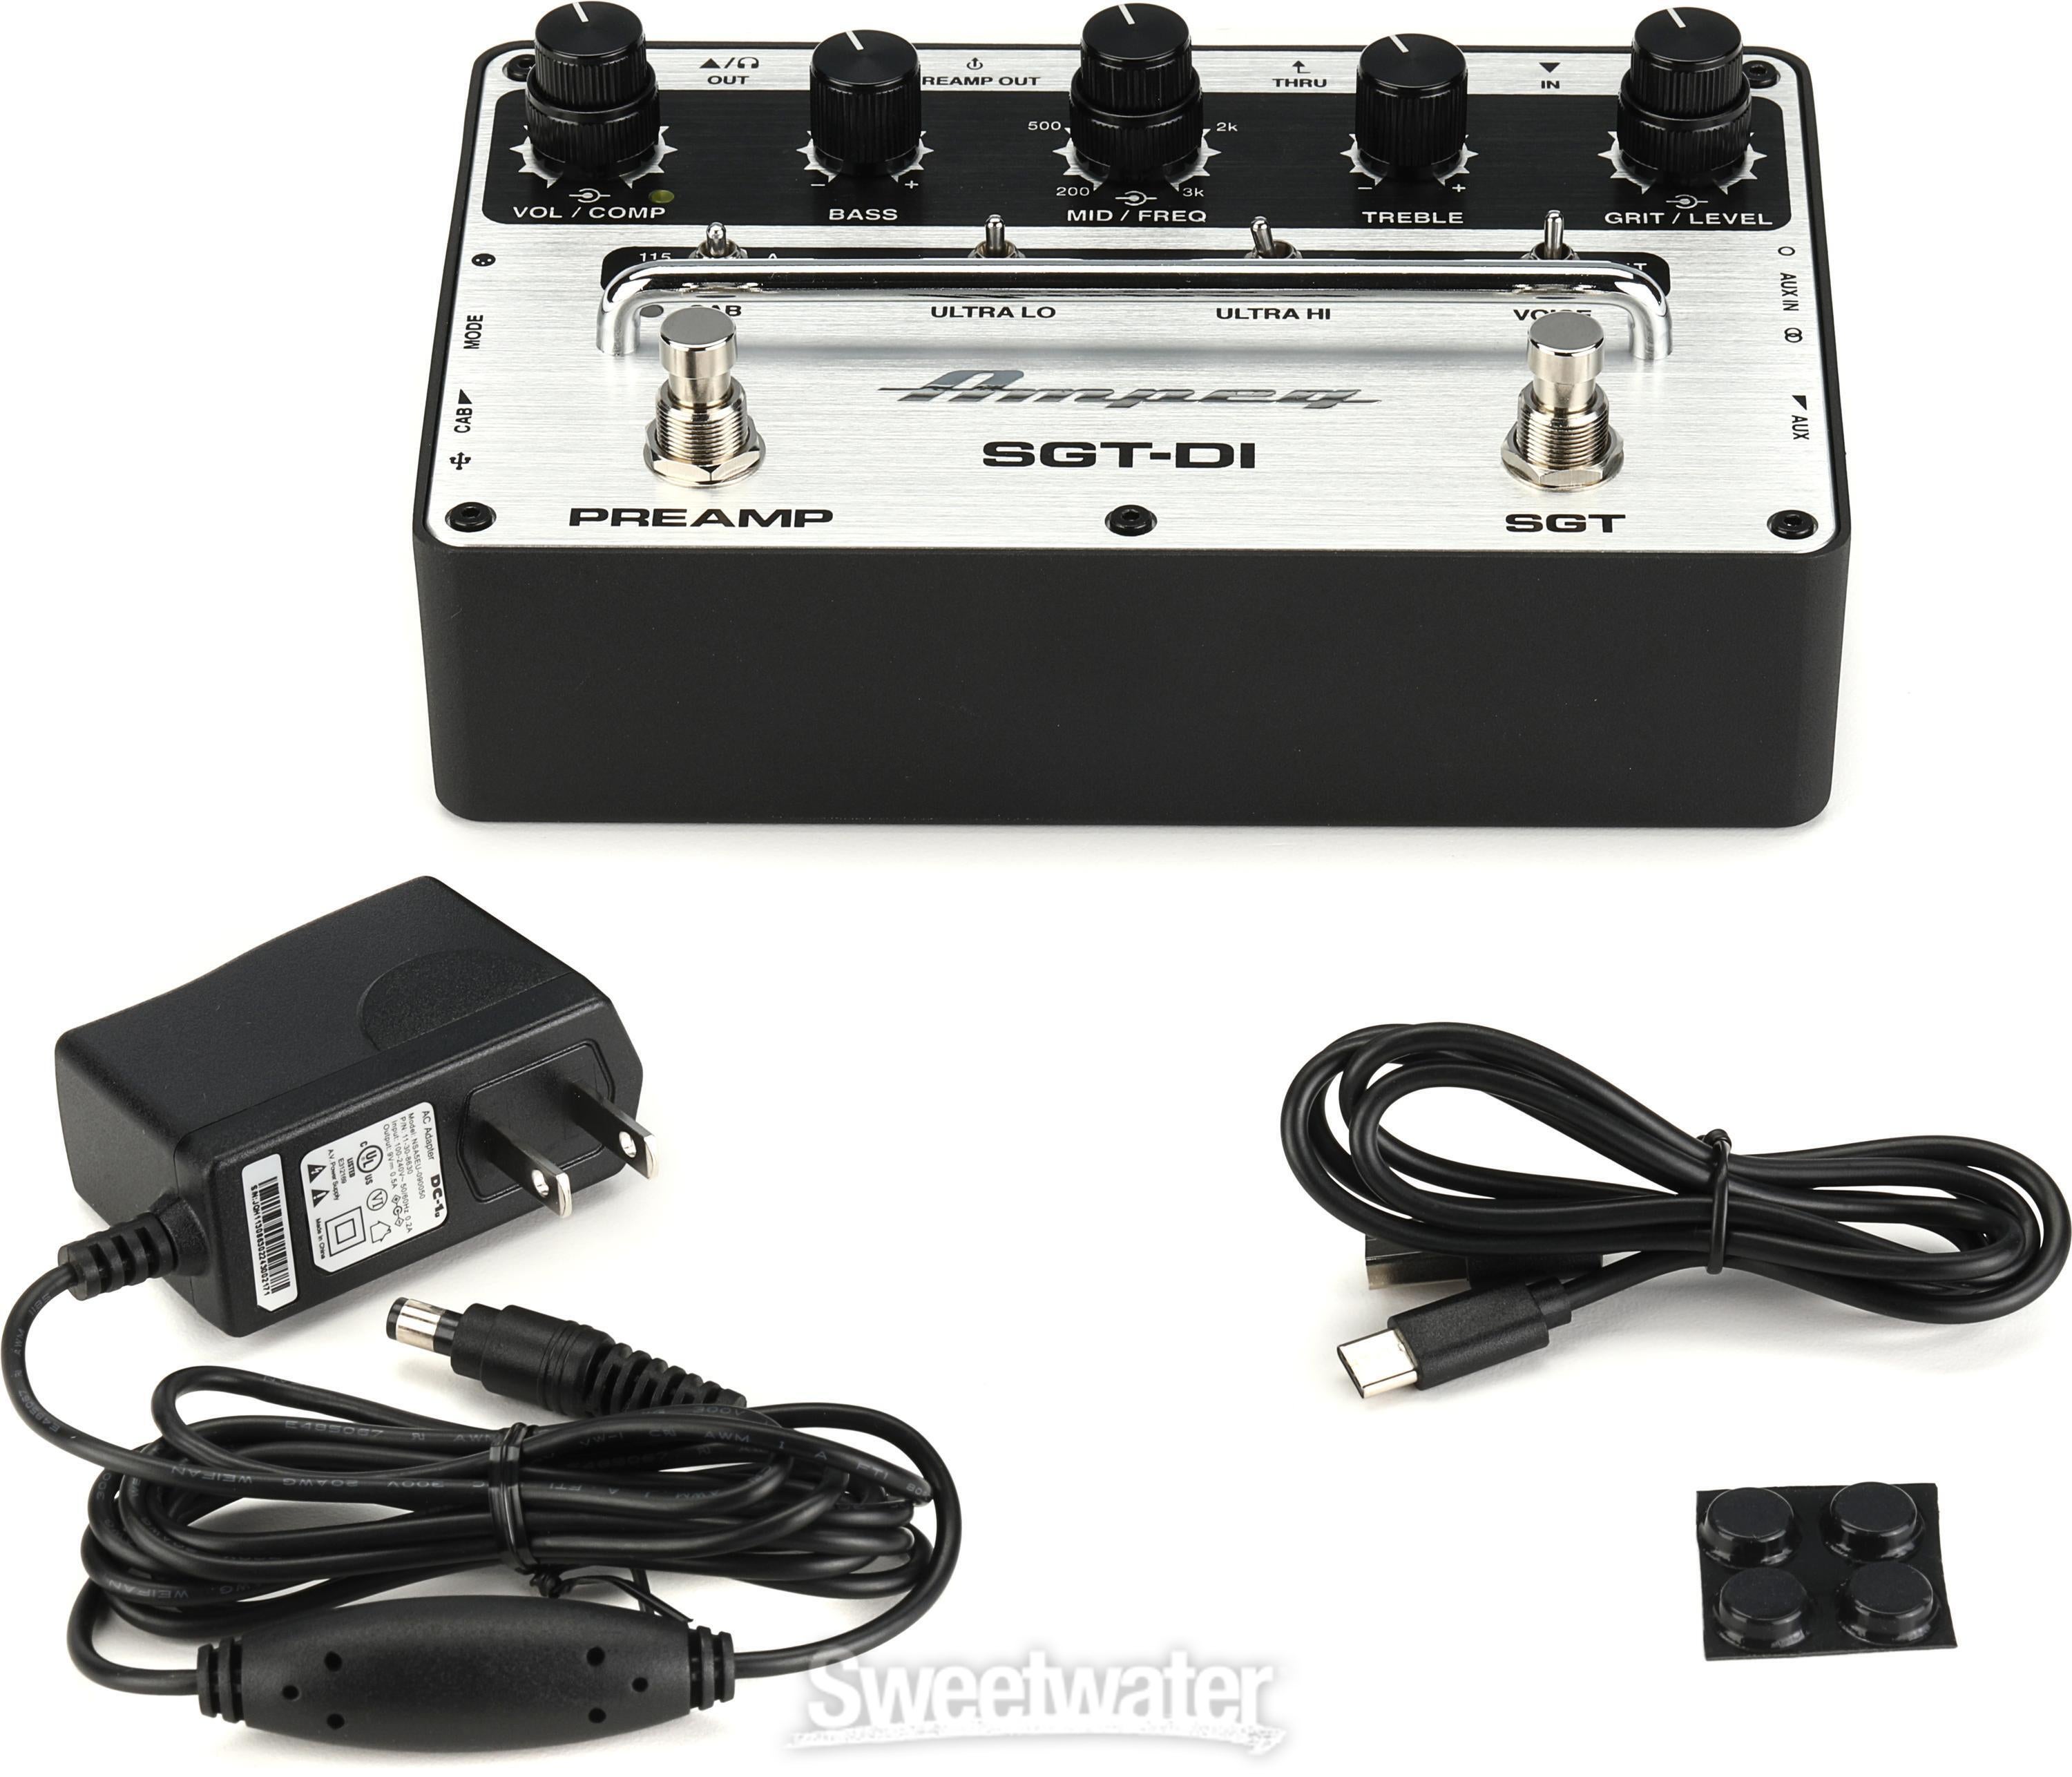 Ampeg SGT-DI Bass Preamp Pedal and DI | Sweetwater